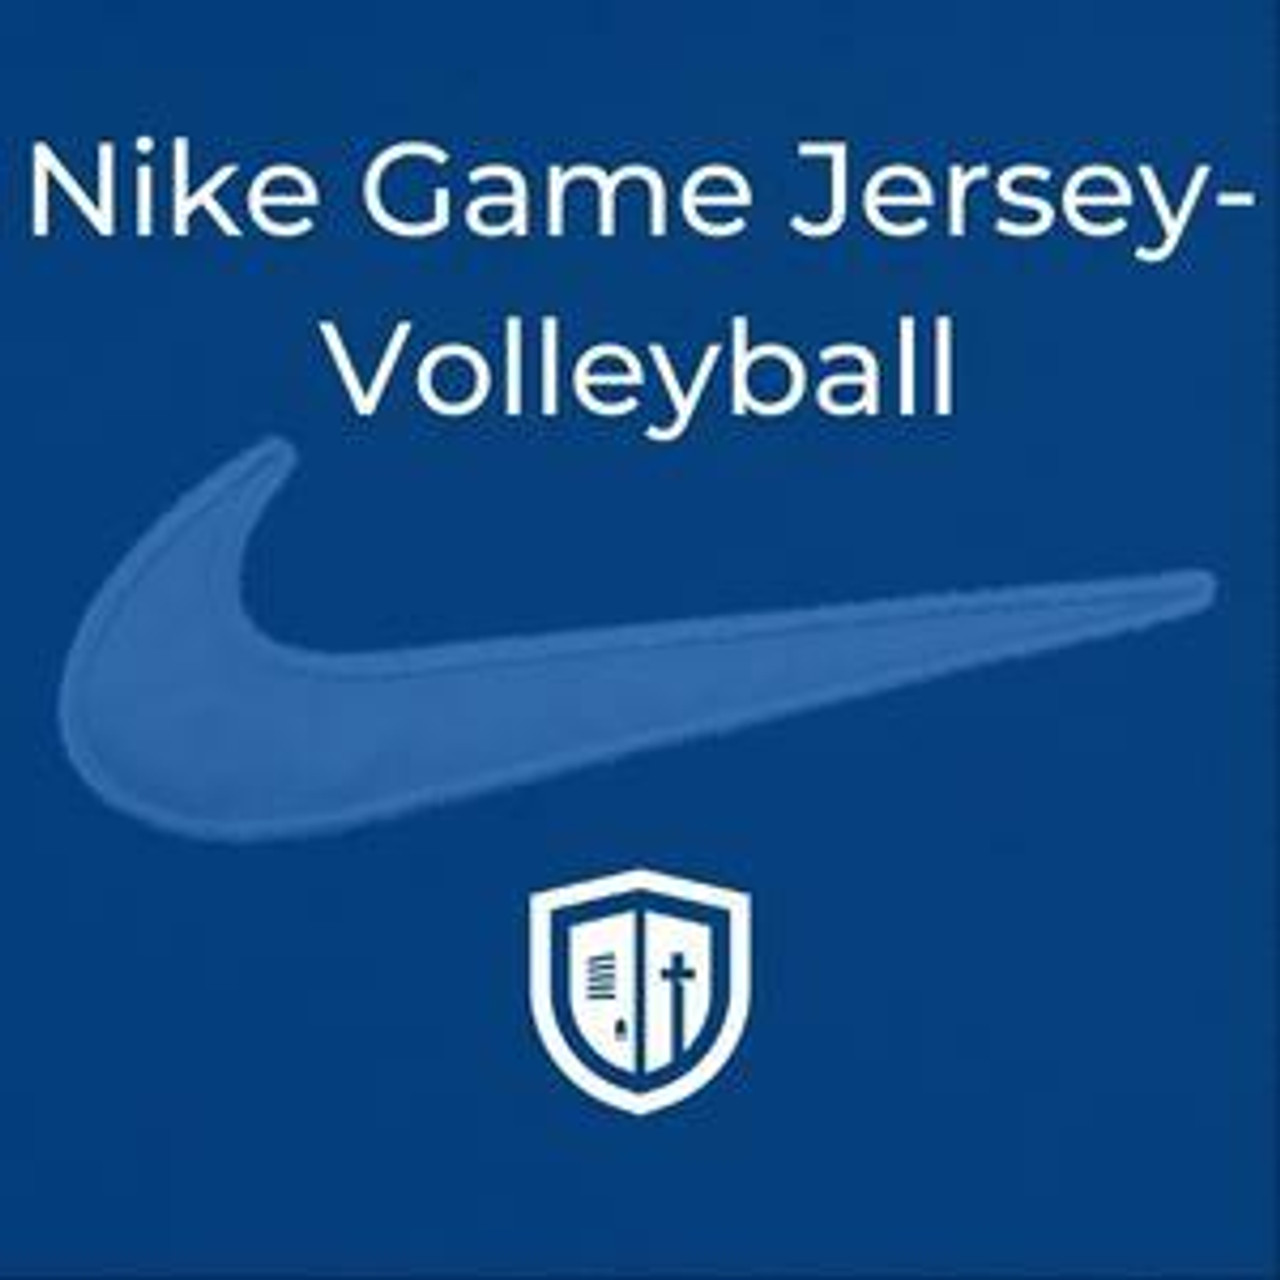 Game Jersey - Volleyball